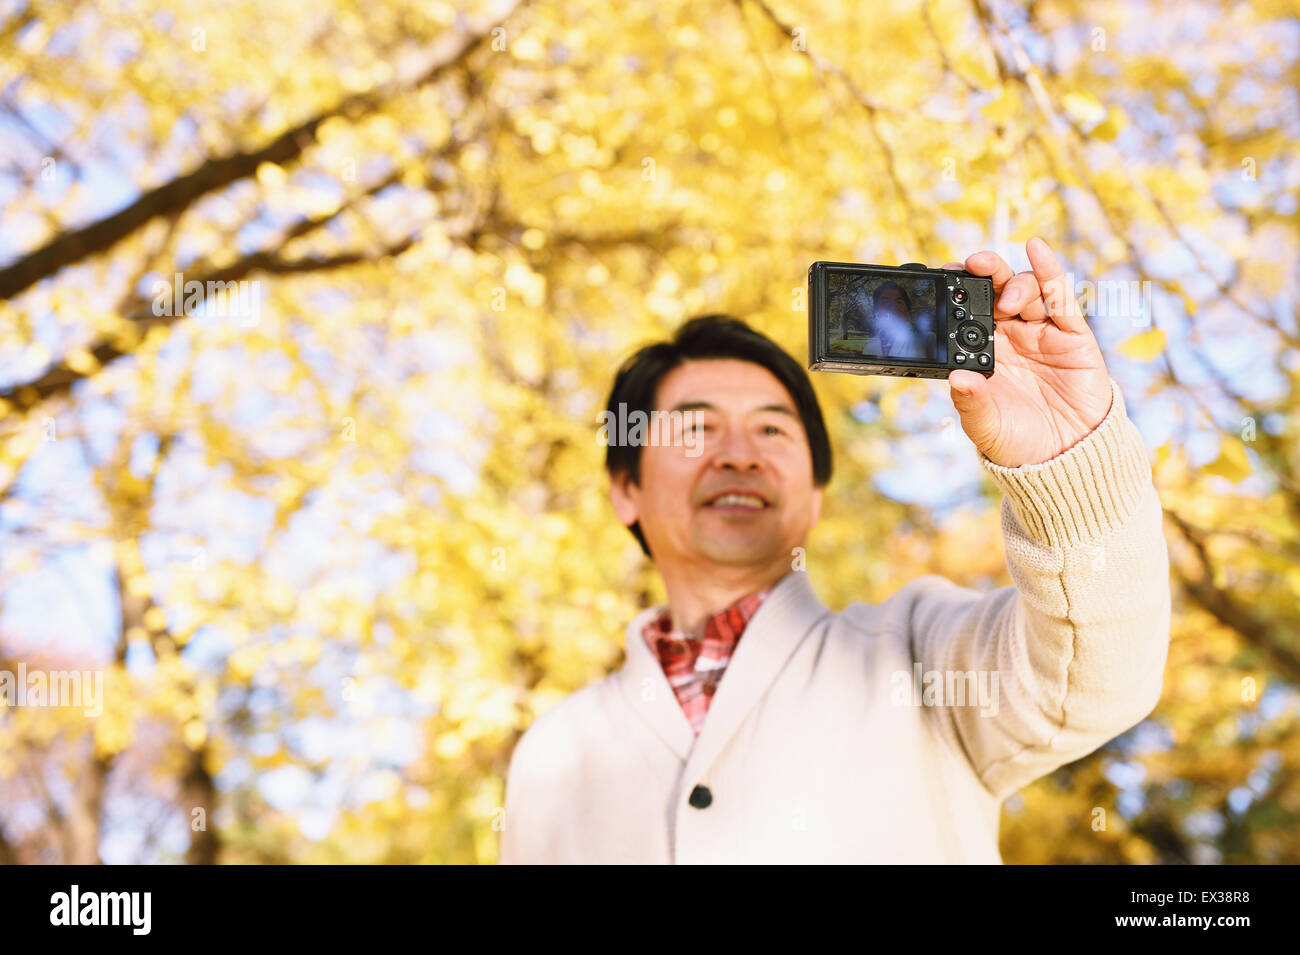 Senior Japanese man taking a selfie in a city park in Autumn Stock Photo